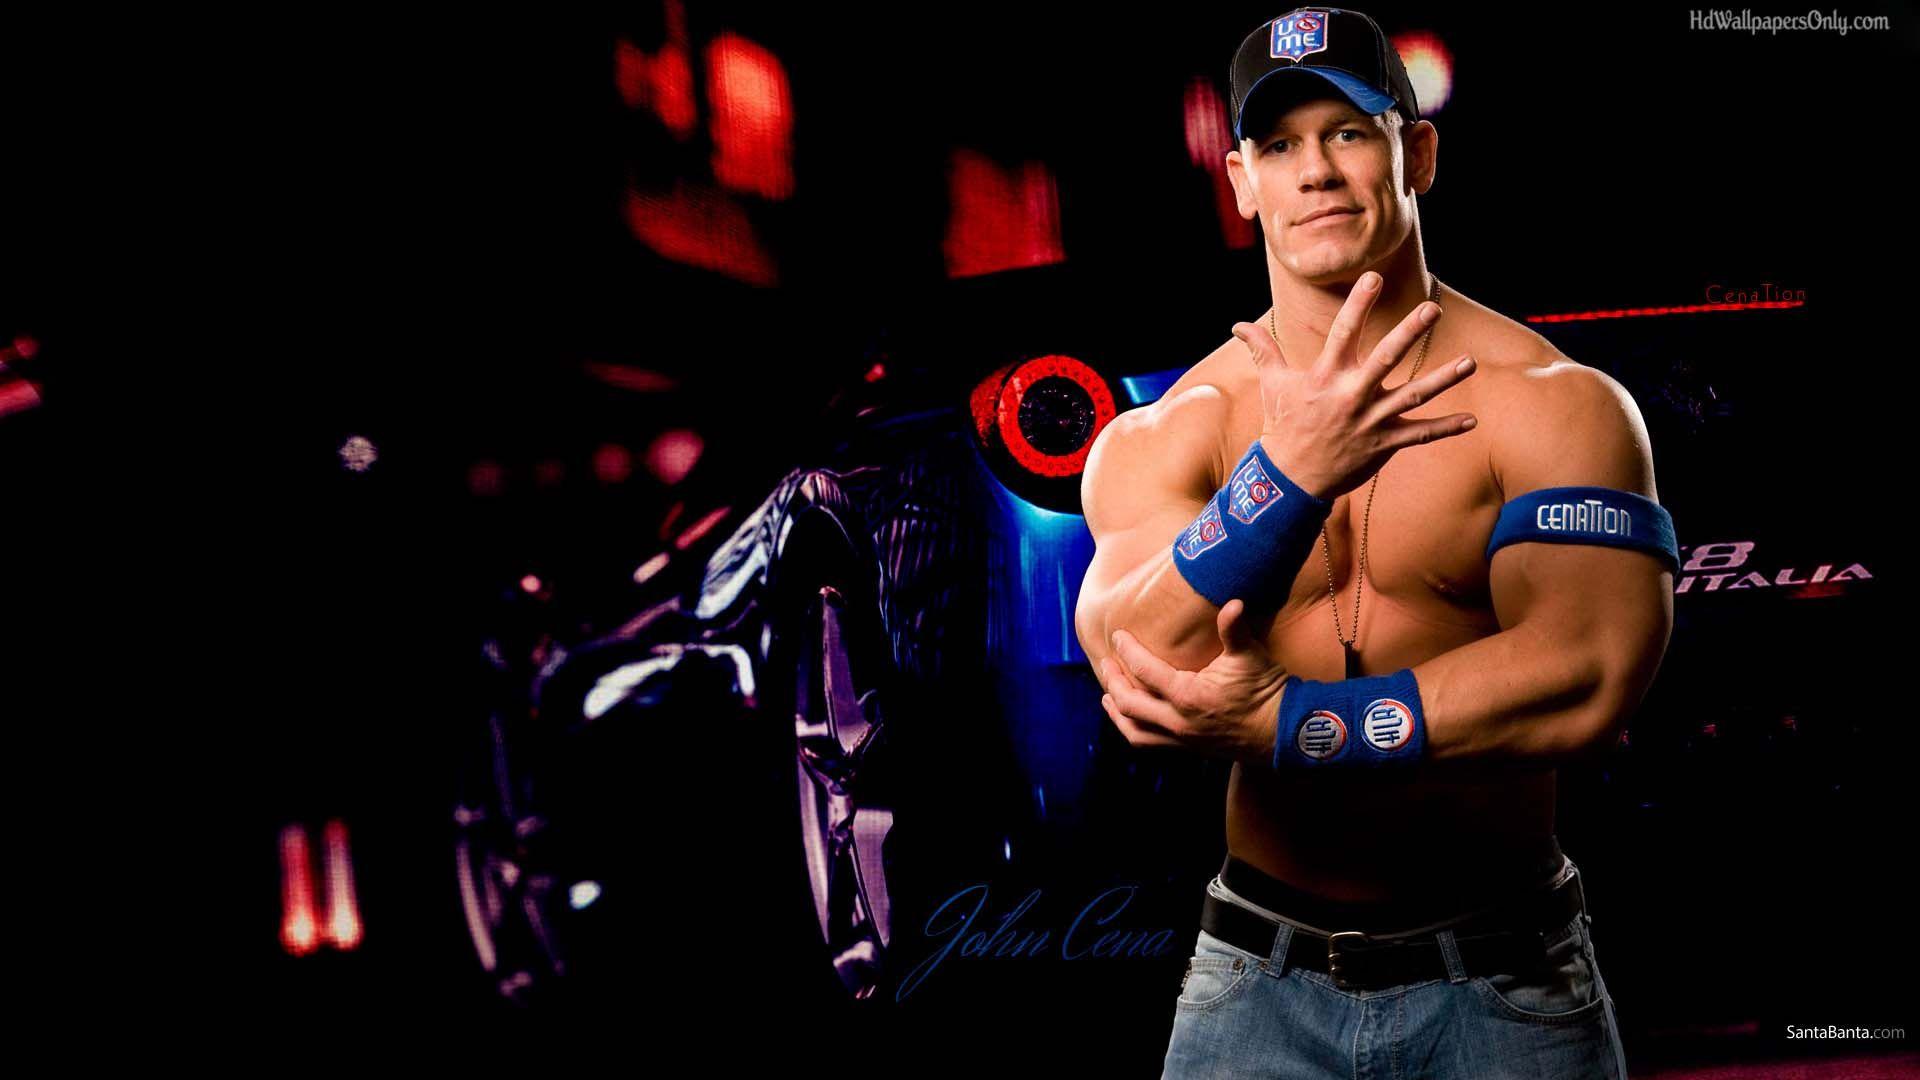 By Napoleon Aylor Cena HD Wallpaper, 1920x1080 for PC & Mac